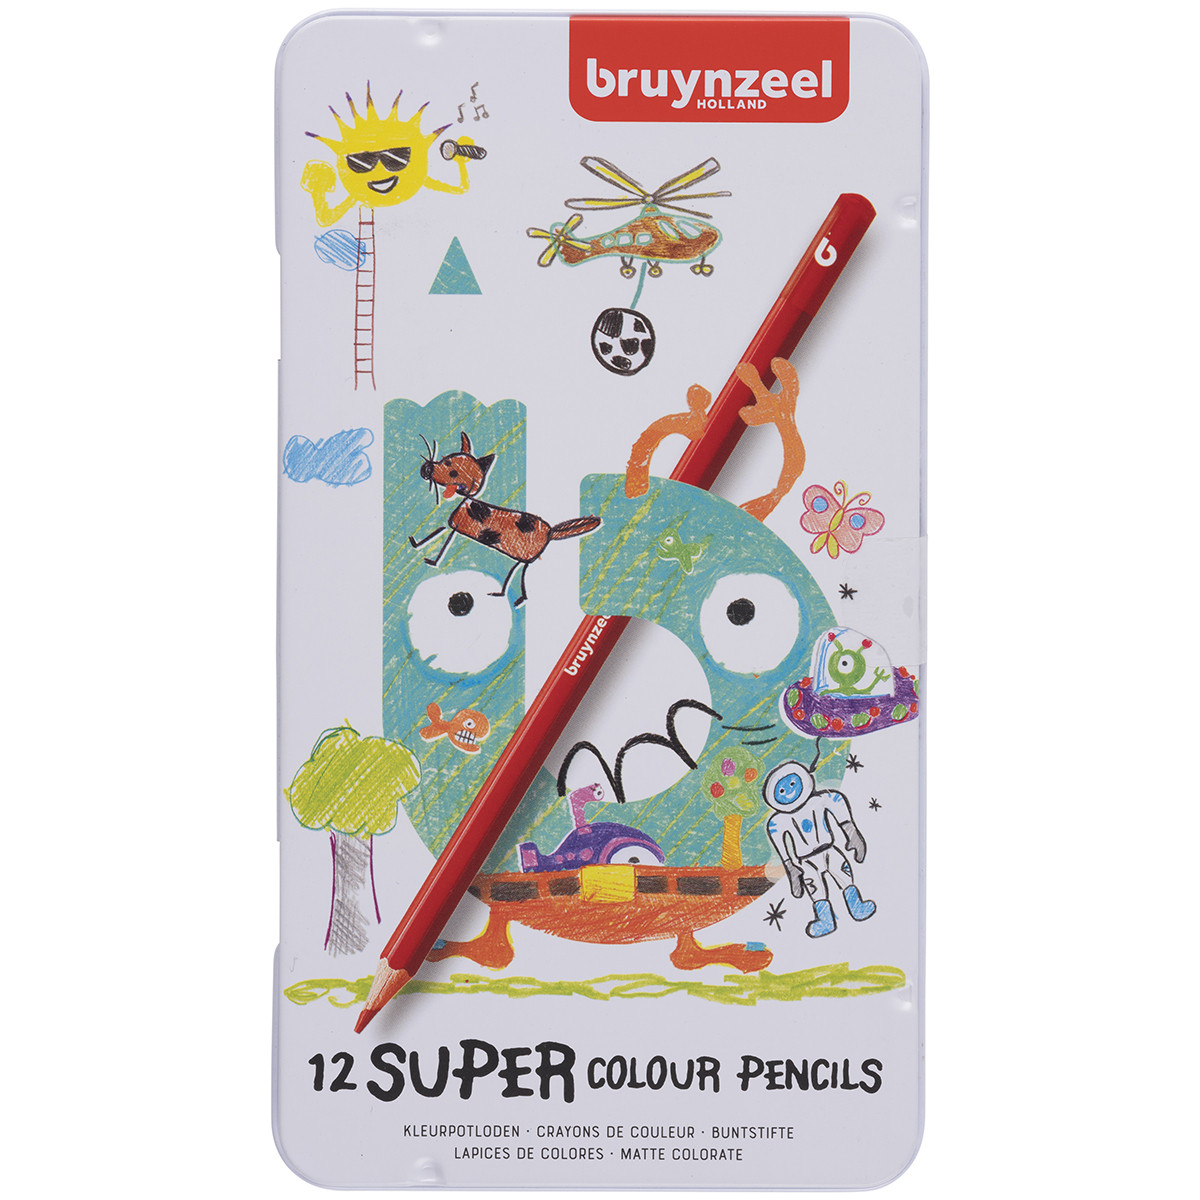 Bruynzeel Super Colour Pencils - Assorted Colours (Pack of 12)